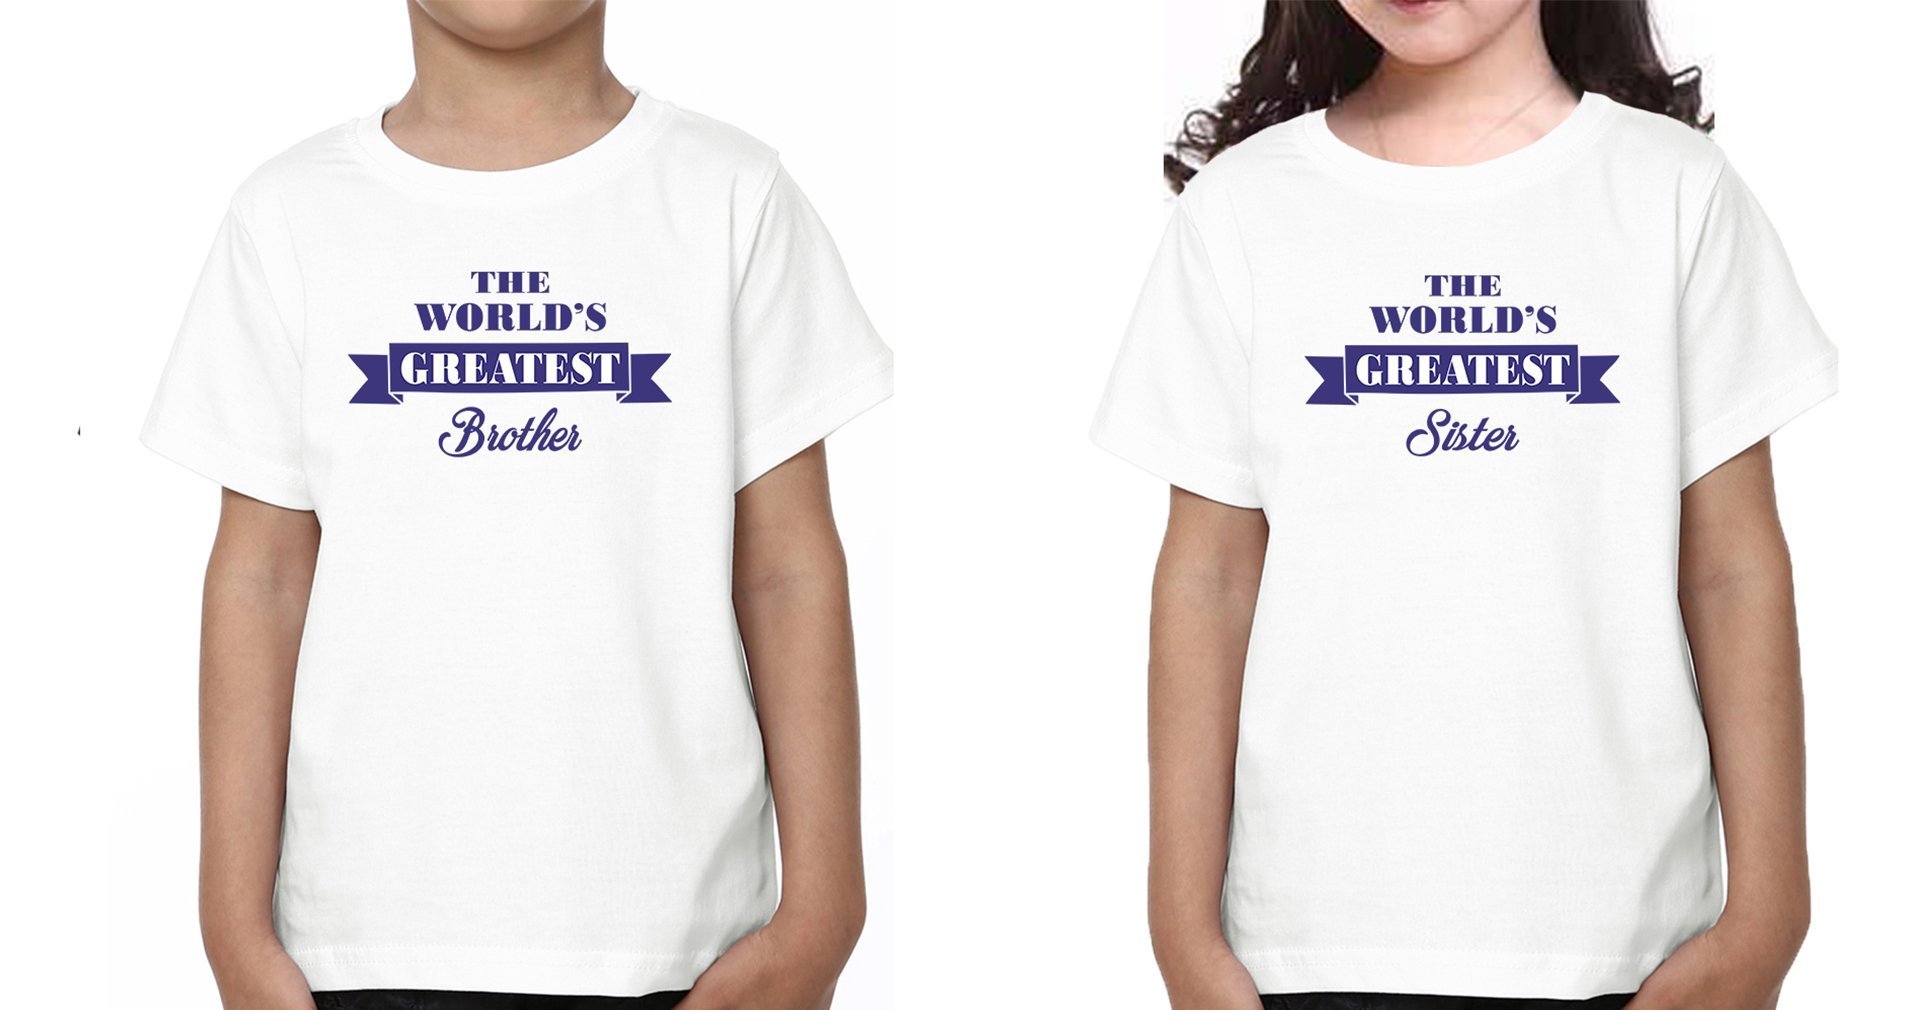 Greatest Brother Greatest Sister Brother-Sister Kid Half Sleeves T-Shirts -FunkyTradition - FunkyTradition